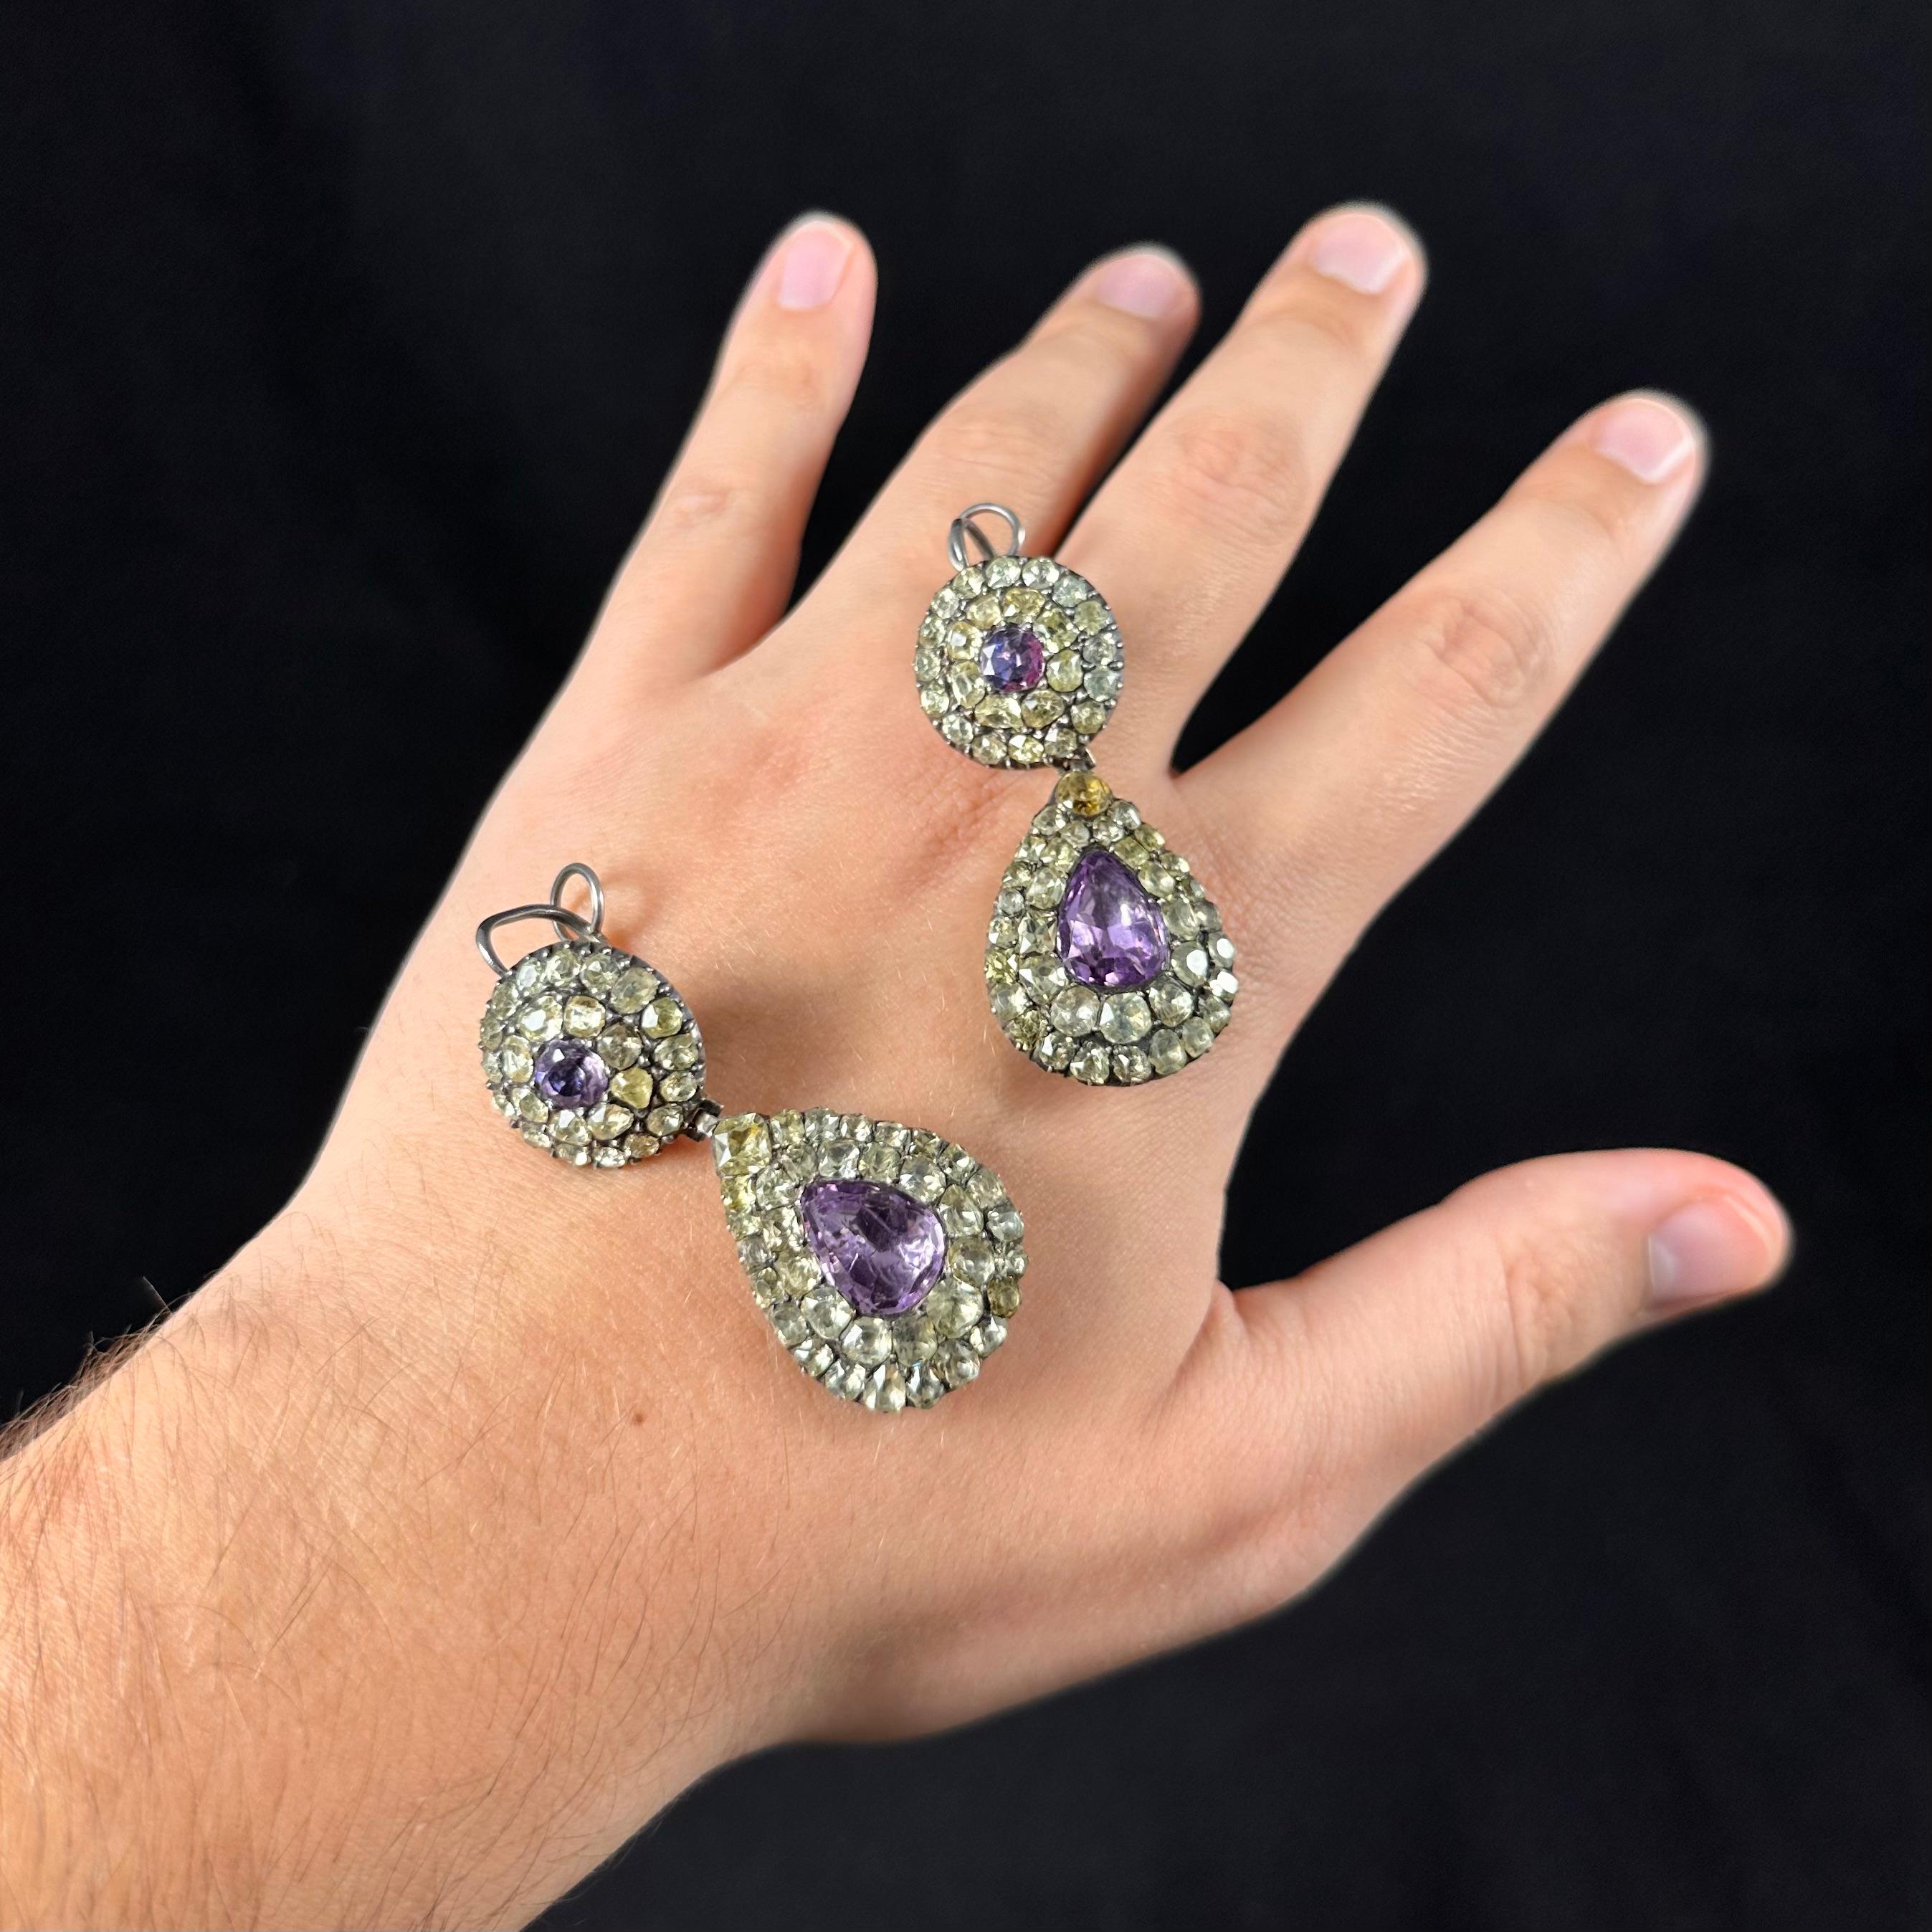 Antique Chrysolite Chrysoberyl Amethyst Brooch Earrings Silver Set Portuguese For Sale 10